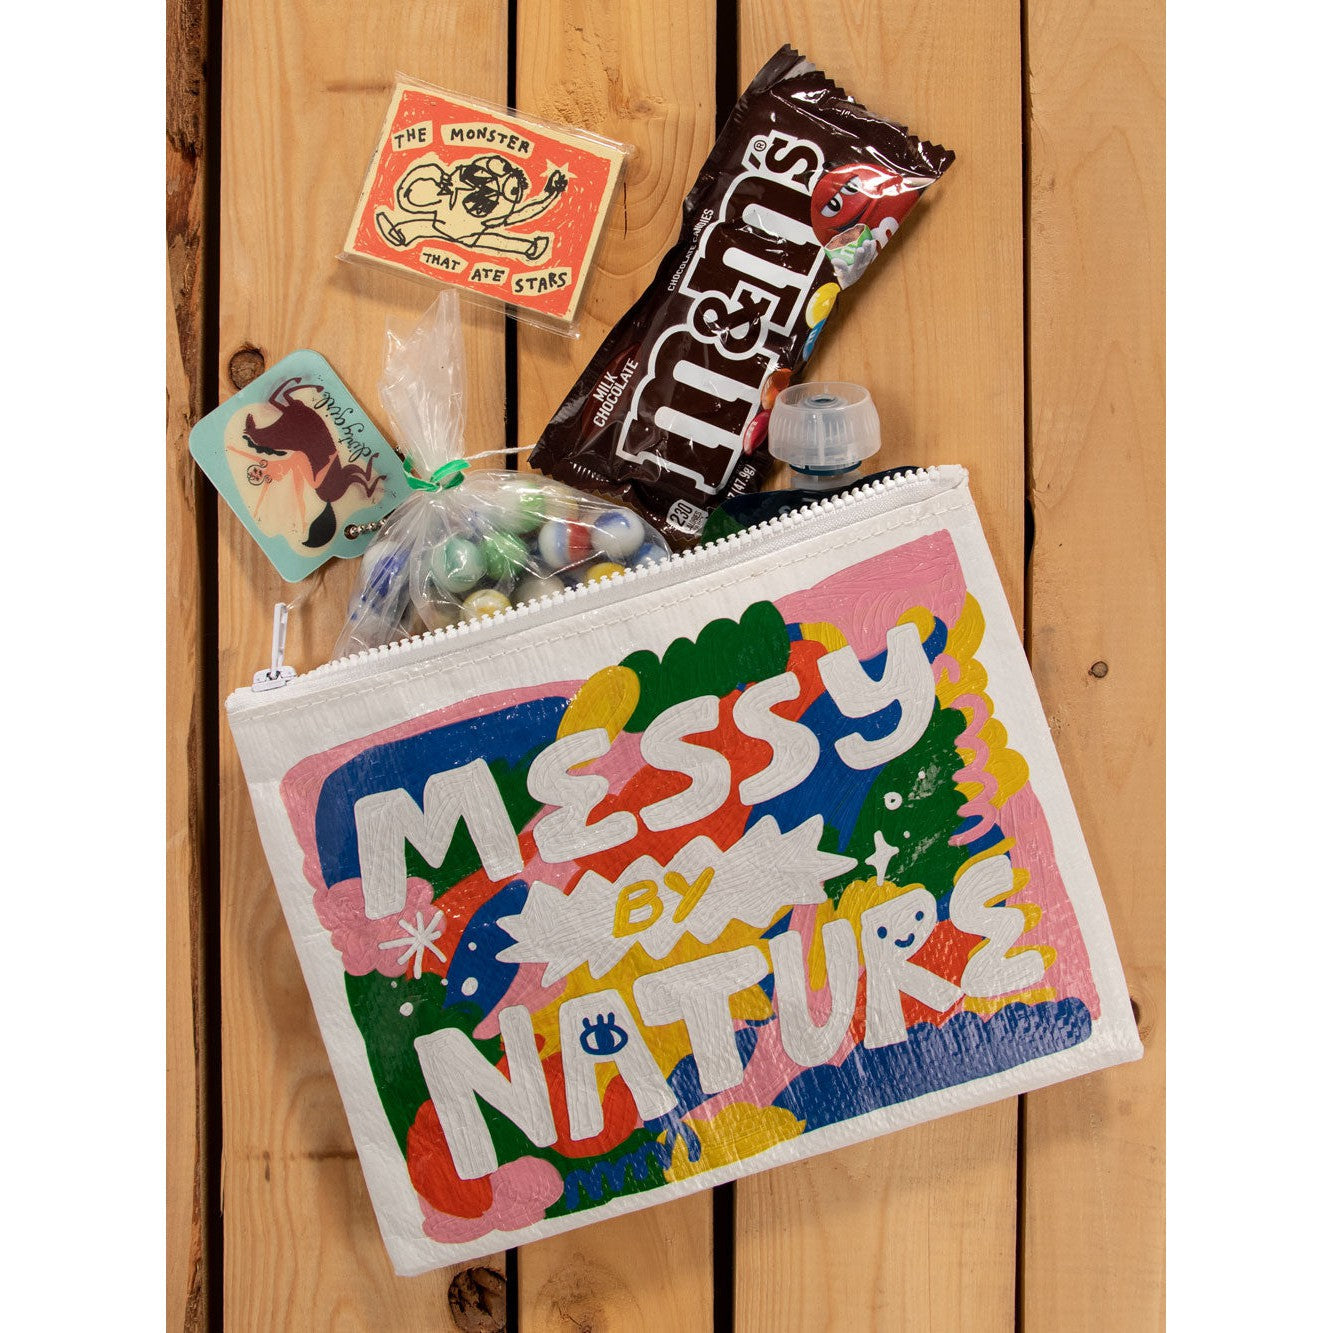 Messy By Nature Zipper Pouch | Recycled Material Case Storage Organizer | 7.25" x 9.5"